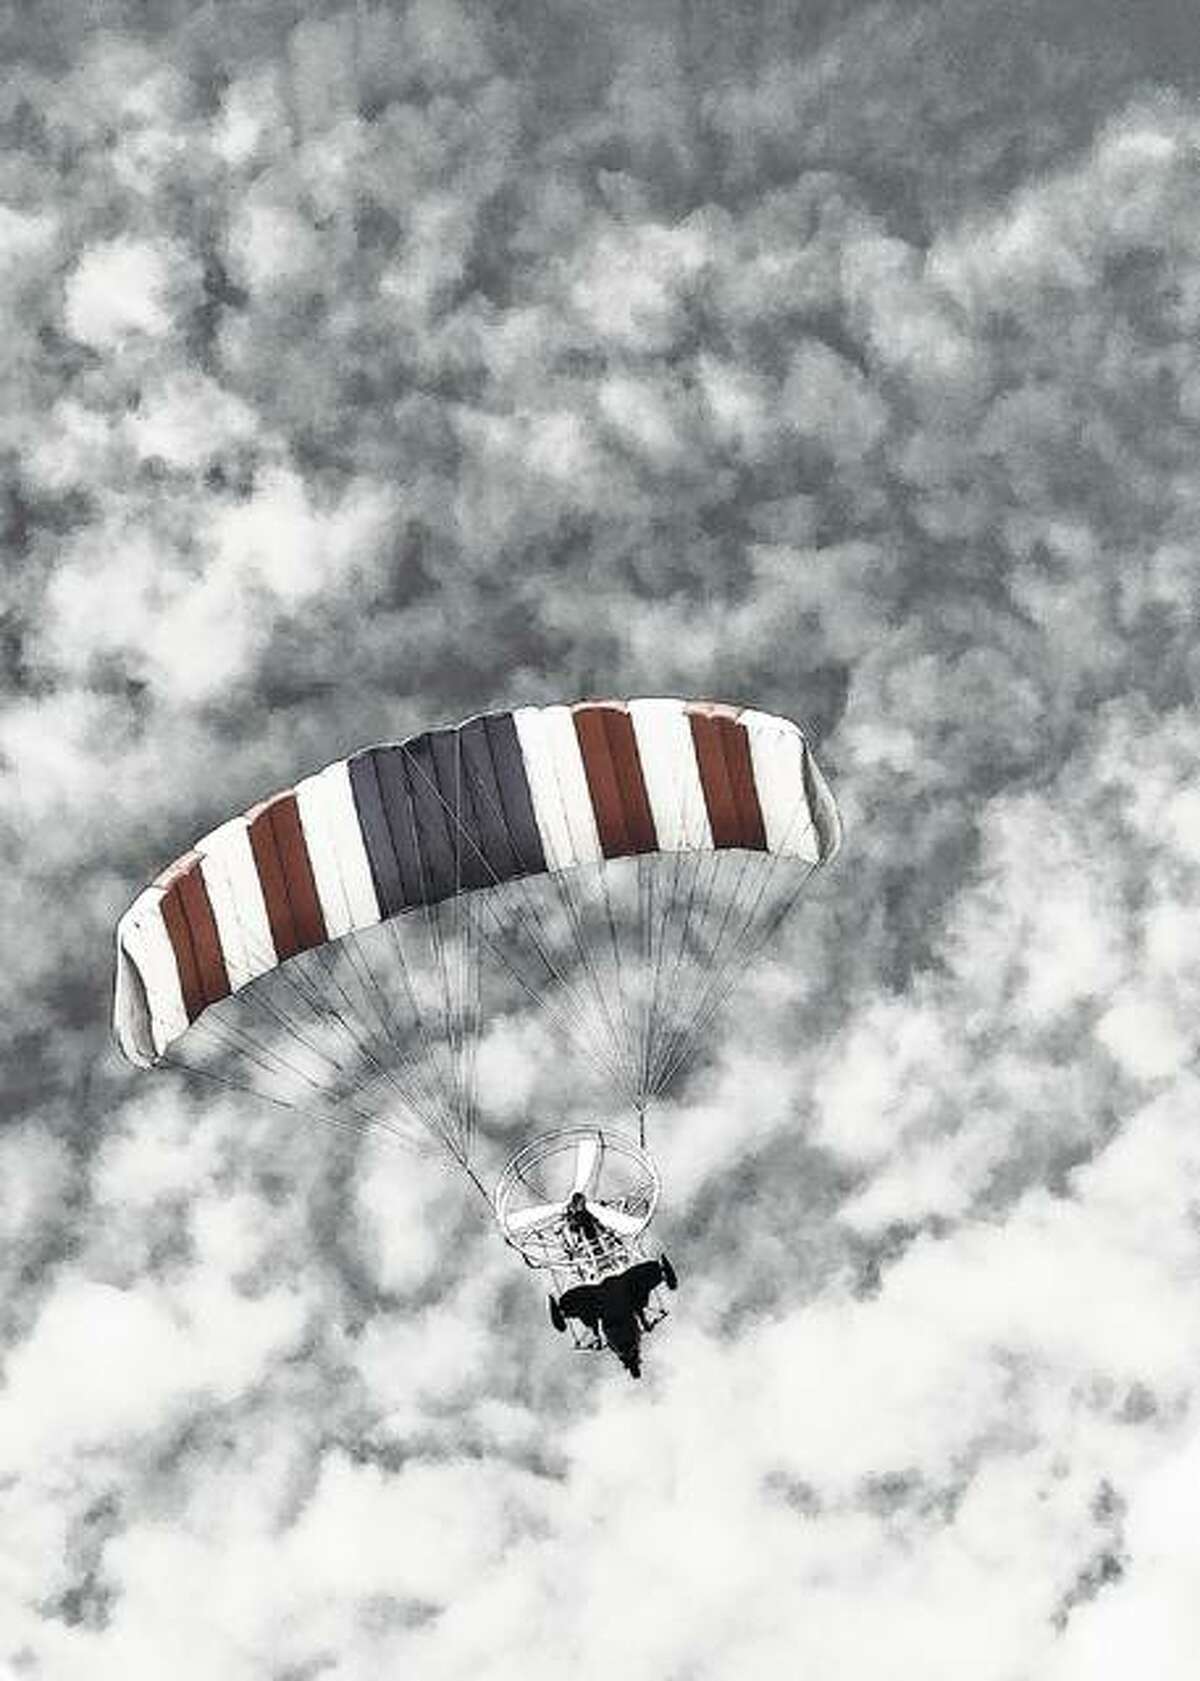 Lainee Ford of Franklin captured a patriotic-colored powered parachute in flight among the clouds.